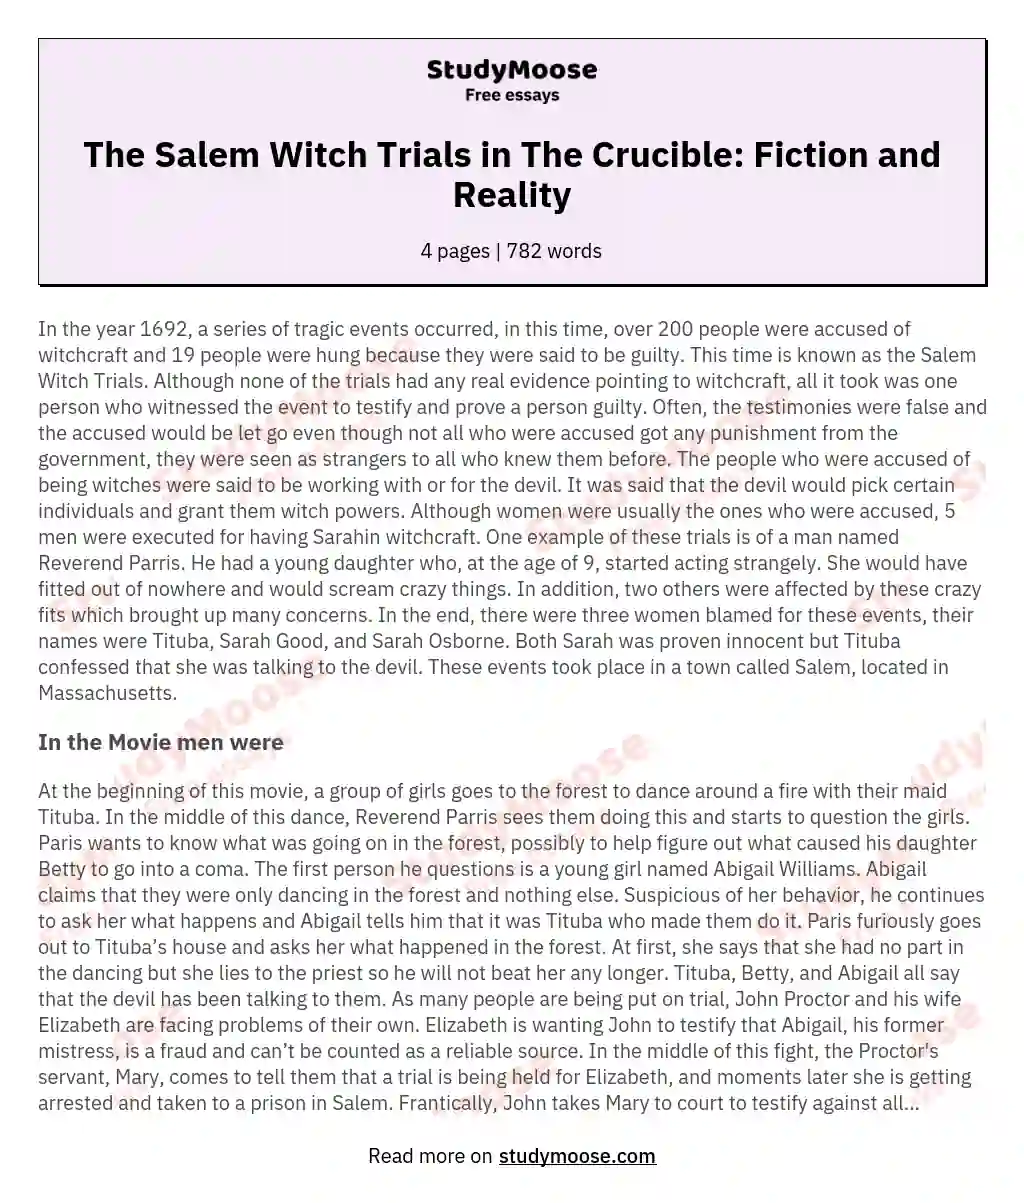 The Salem Witch Trials in The Crucible: Fiction and Reality essay